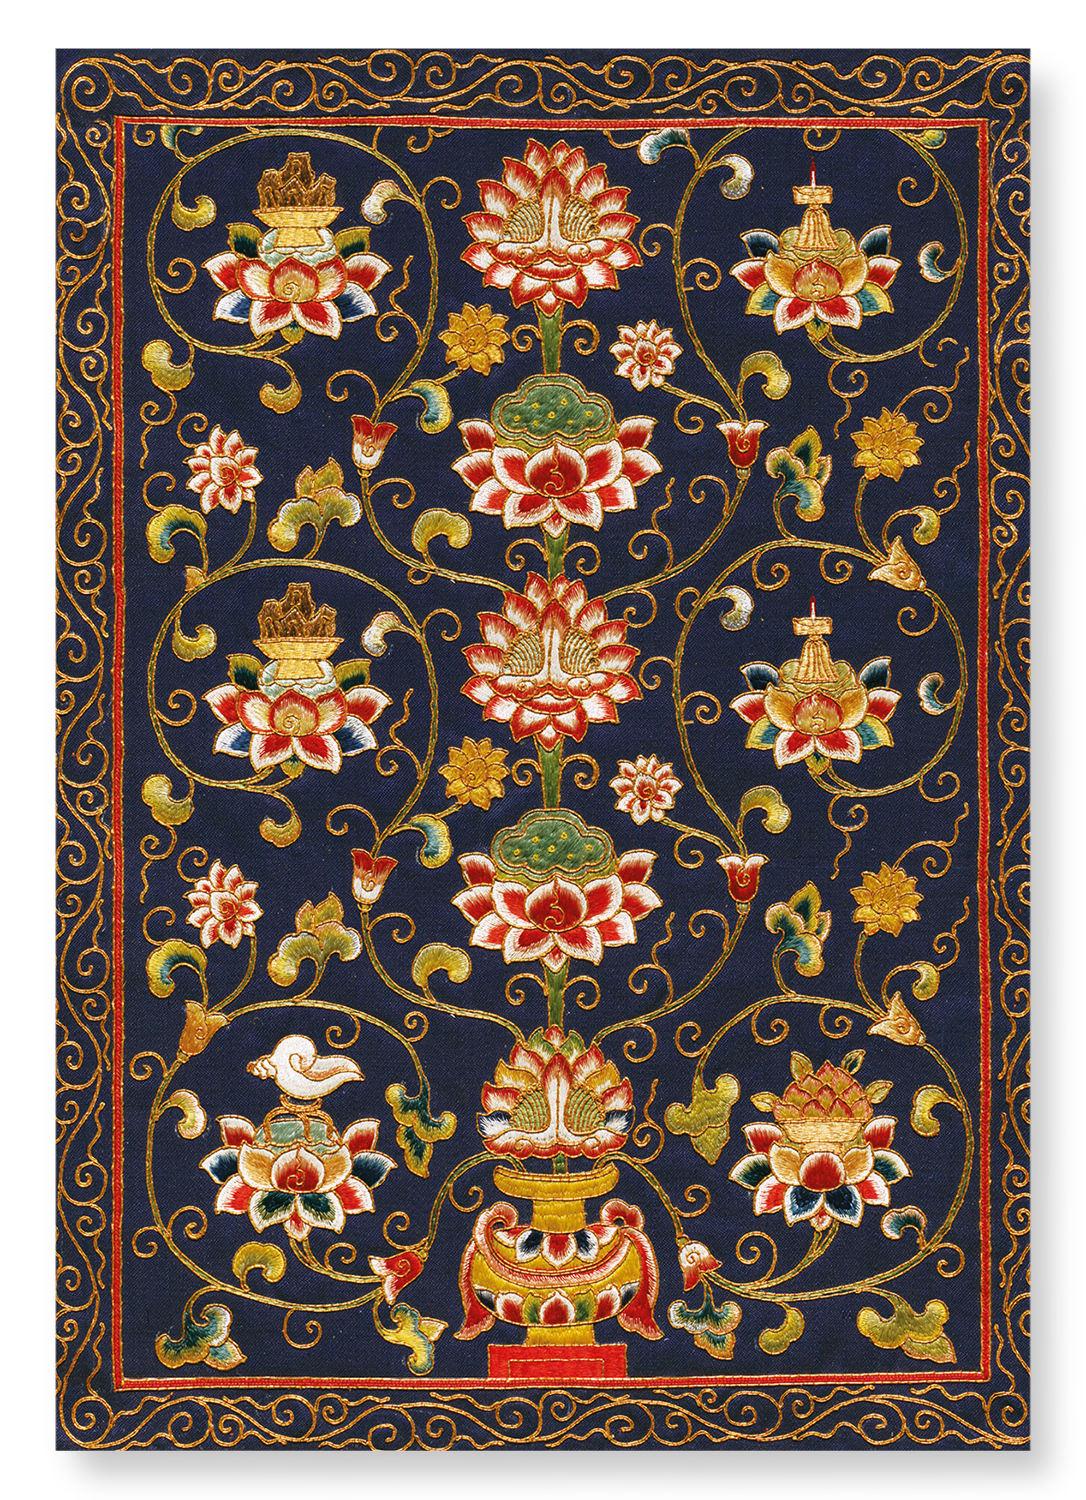 LOTUS FLOWER EMBROIDERY (14TH C)